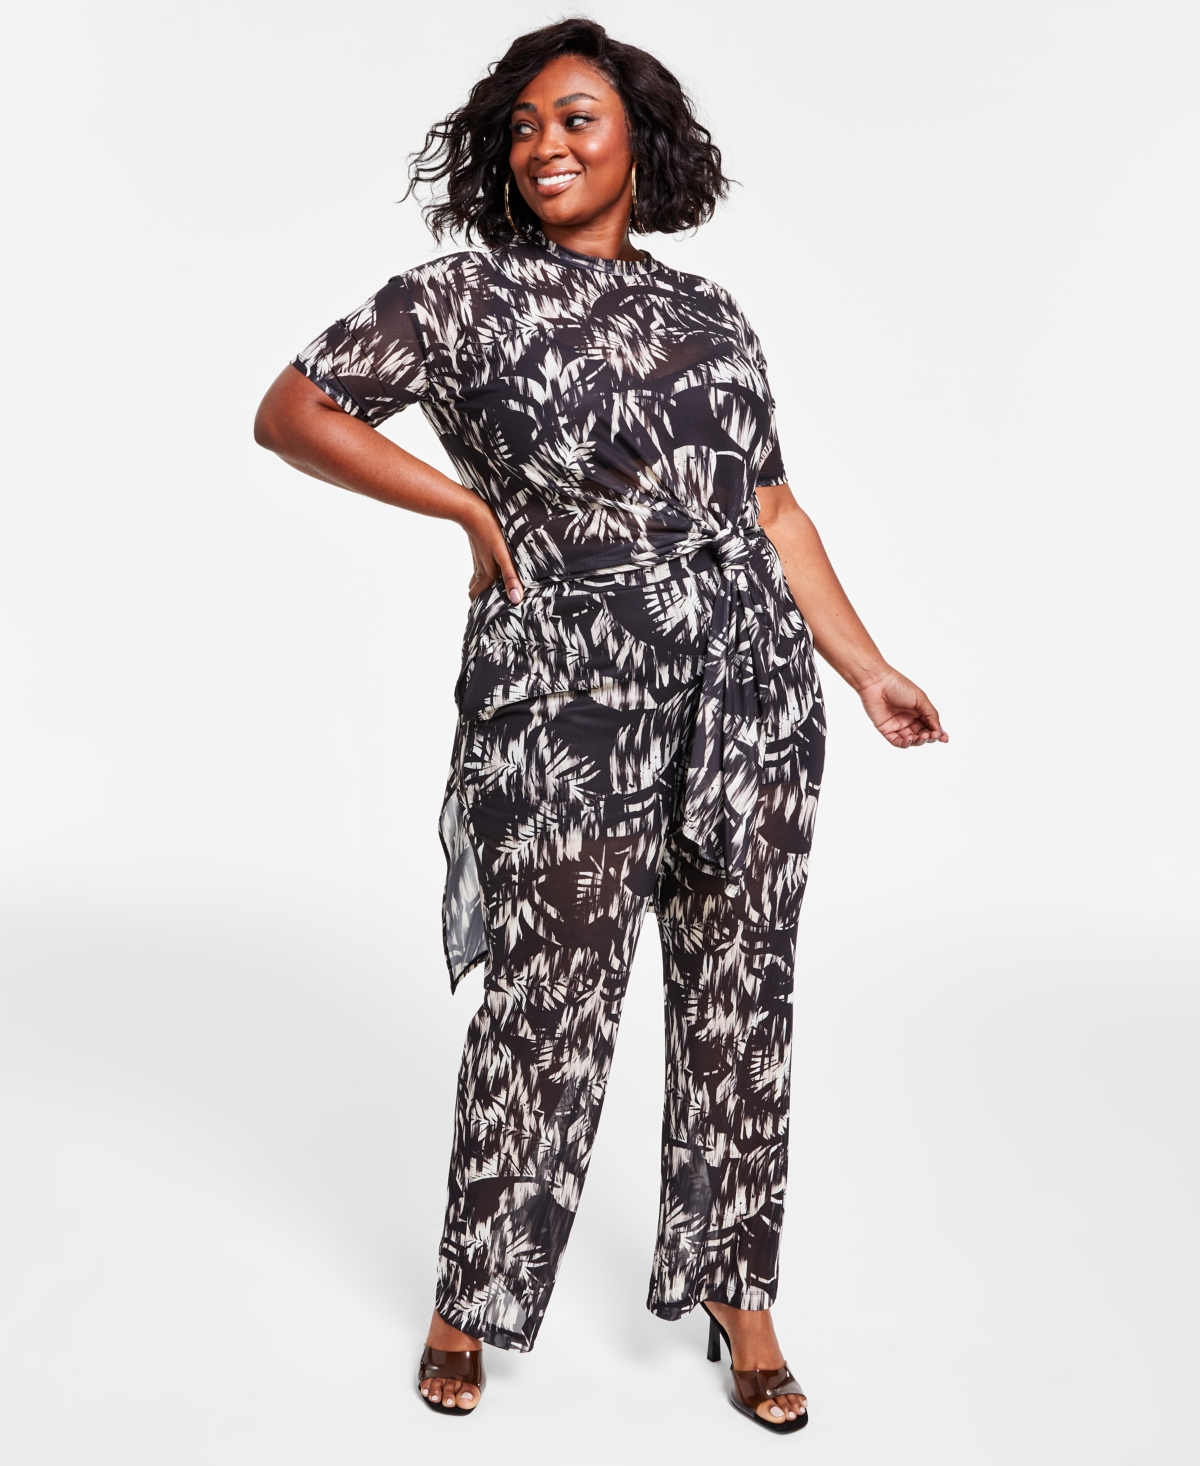 Nina Parker Trendy Plus Size Printed Mesh Pants, Created For Macy's In Black Ground Palm